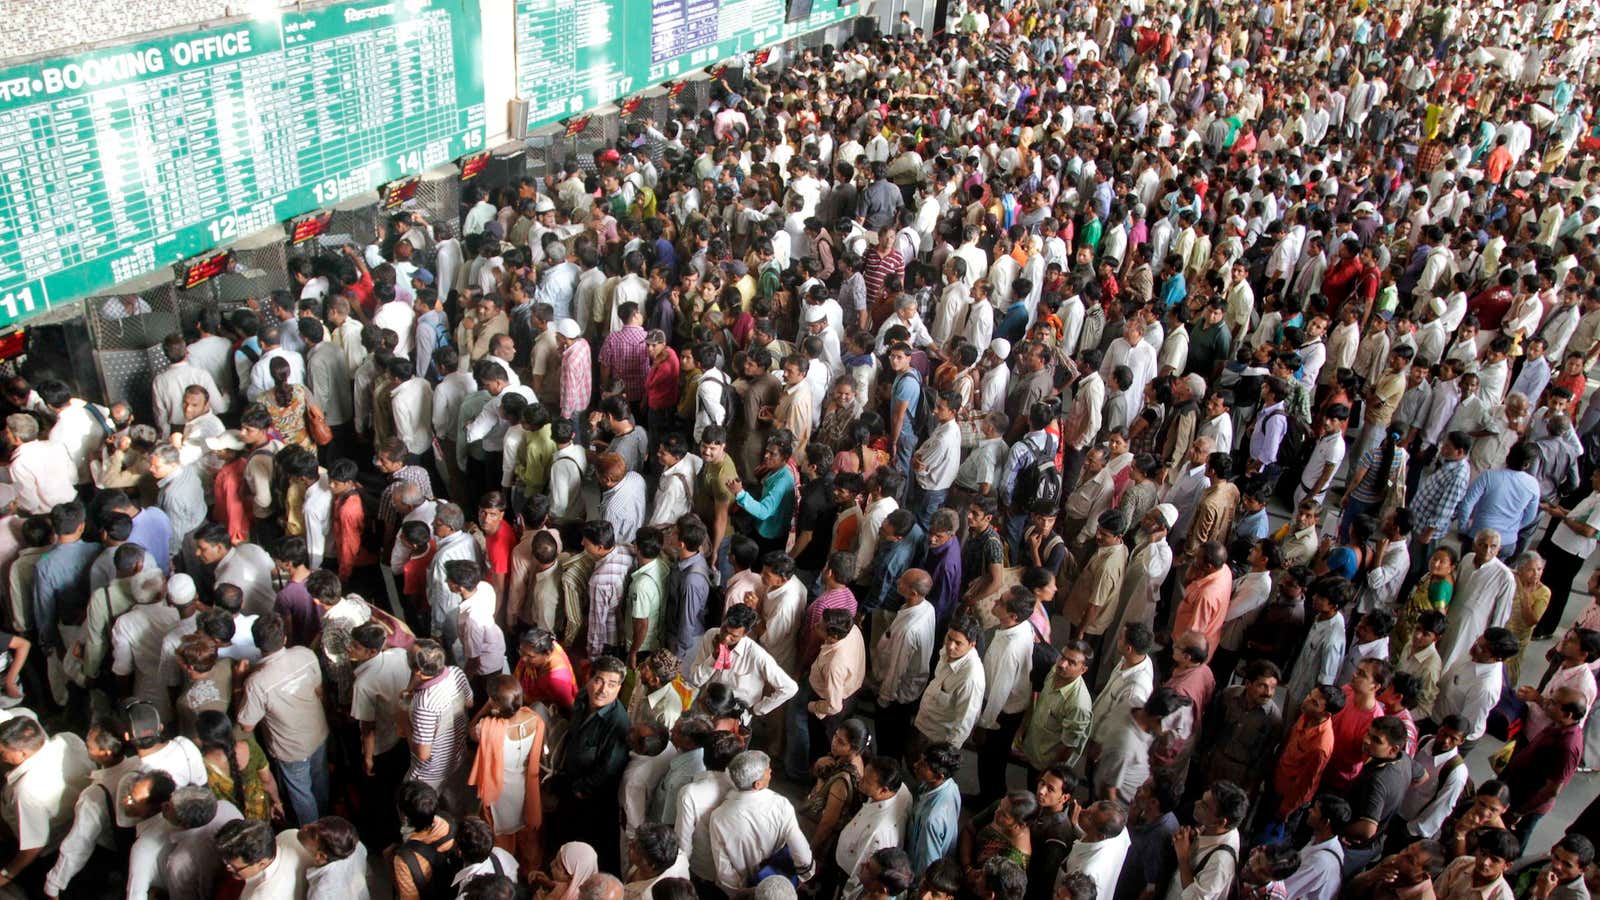 Indian Railways moves more people every day than the population of Australia.